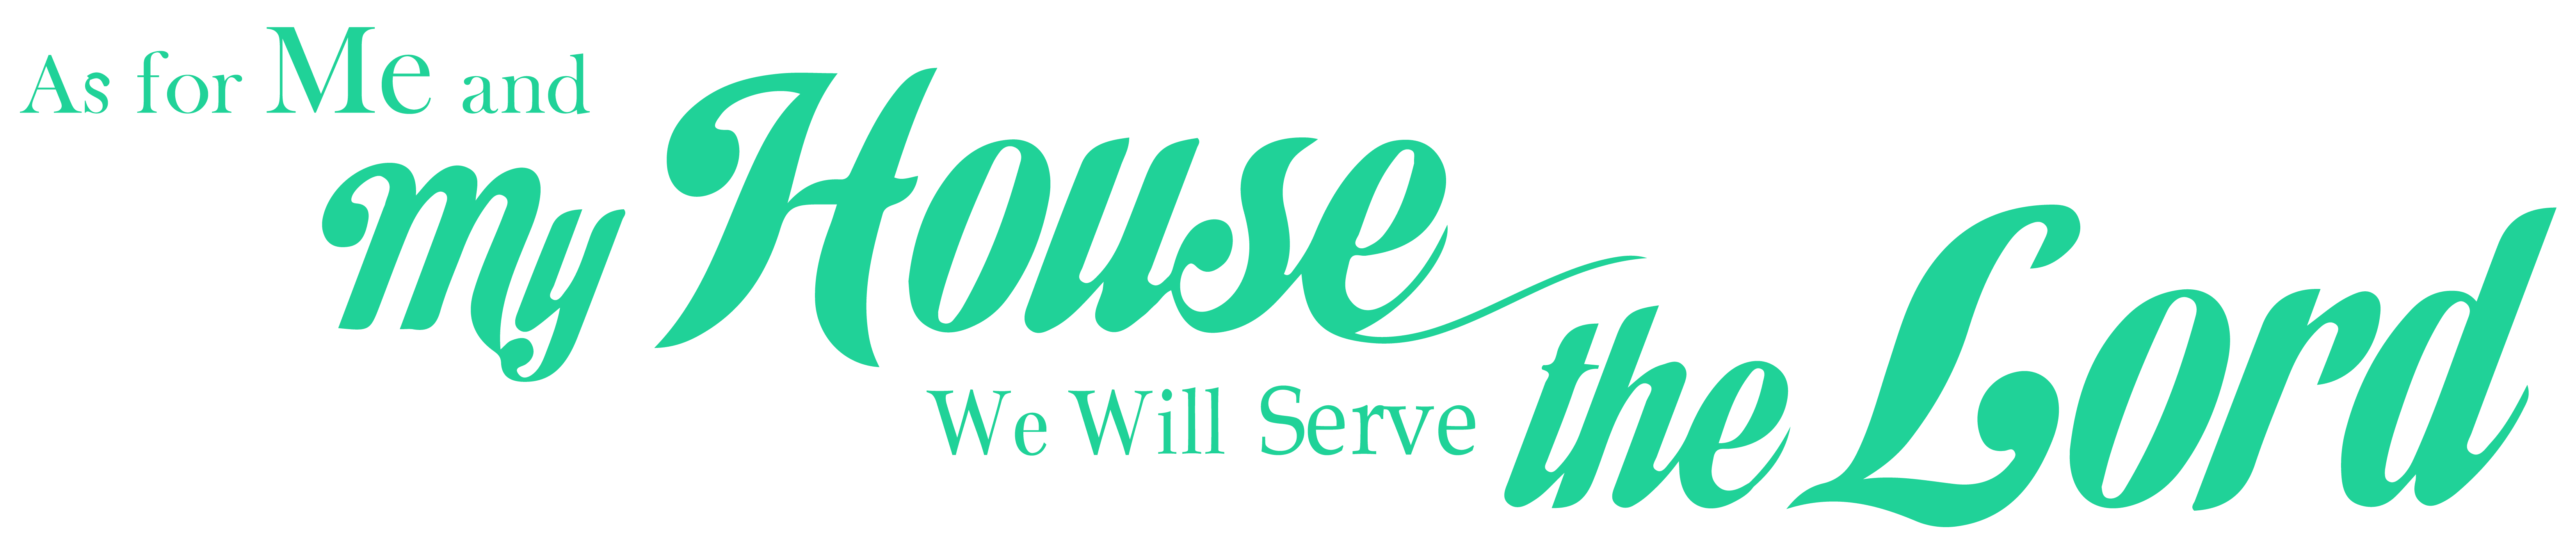 as-for-me-and-my-house-we-will-serve-the-lord-vinyl-decal-sticker-quote